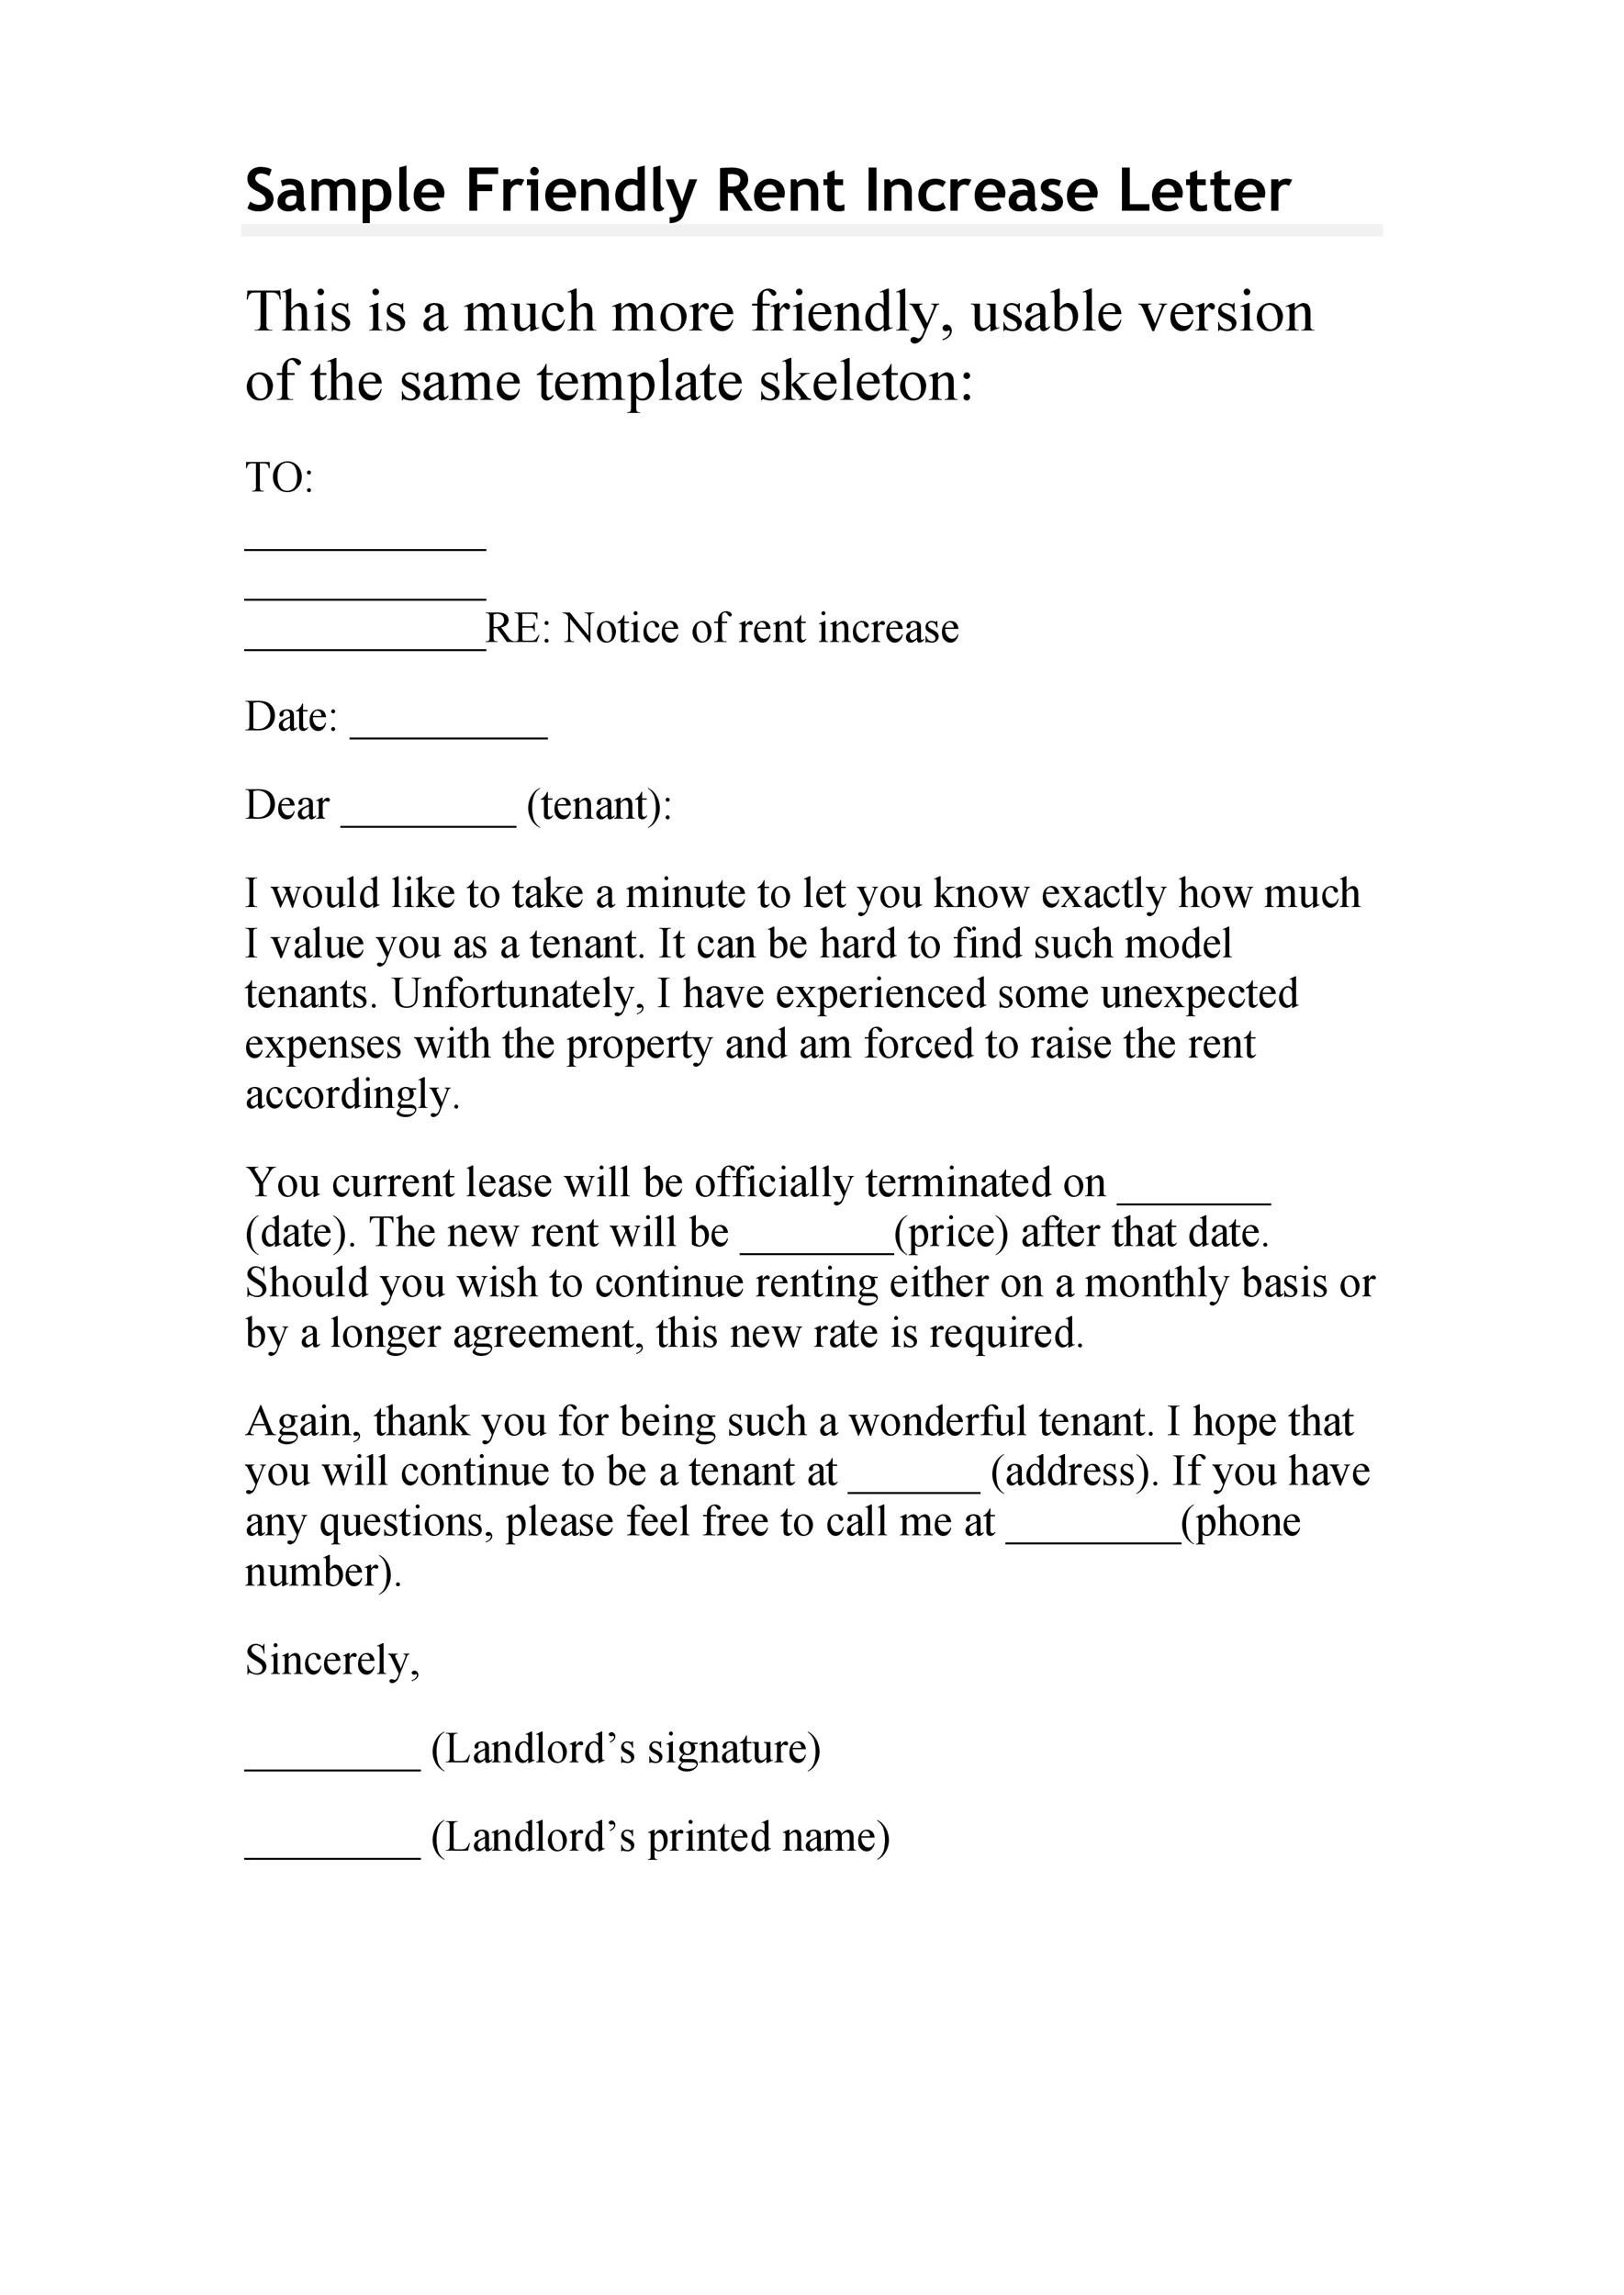 Rental Increase Letter Template 46 Friendly Rent Increase Letters Free Samples Templatelab